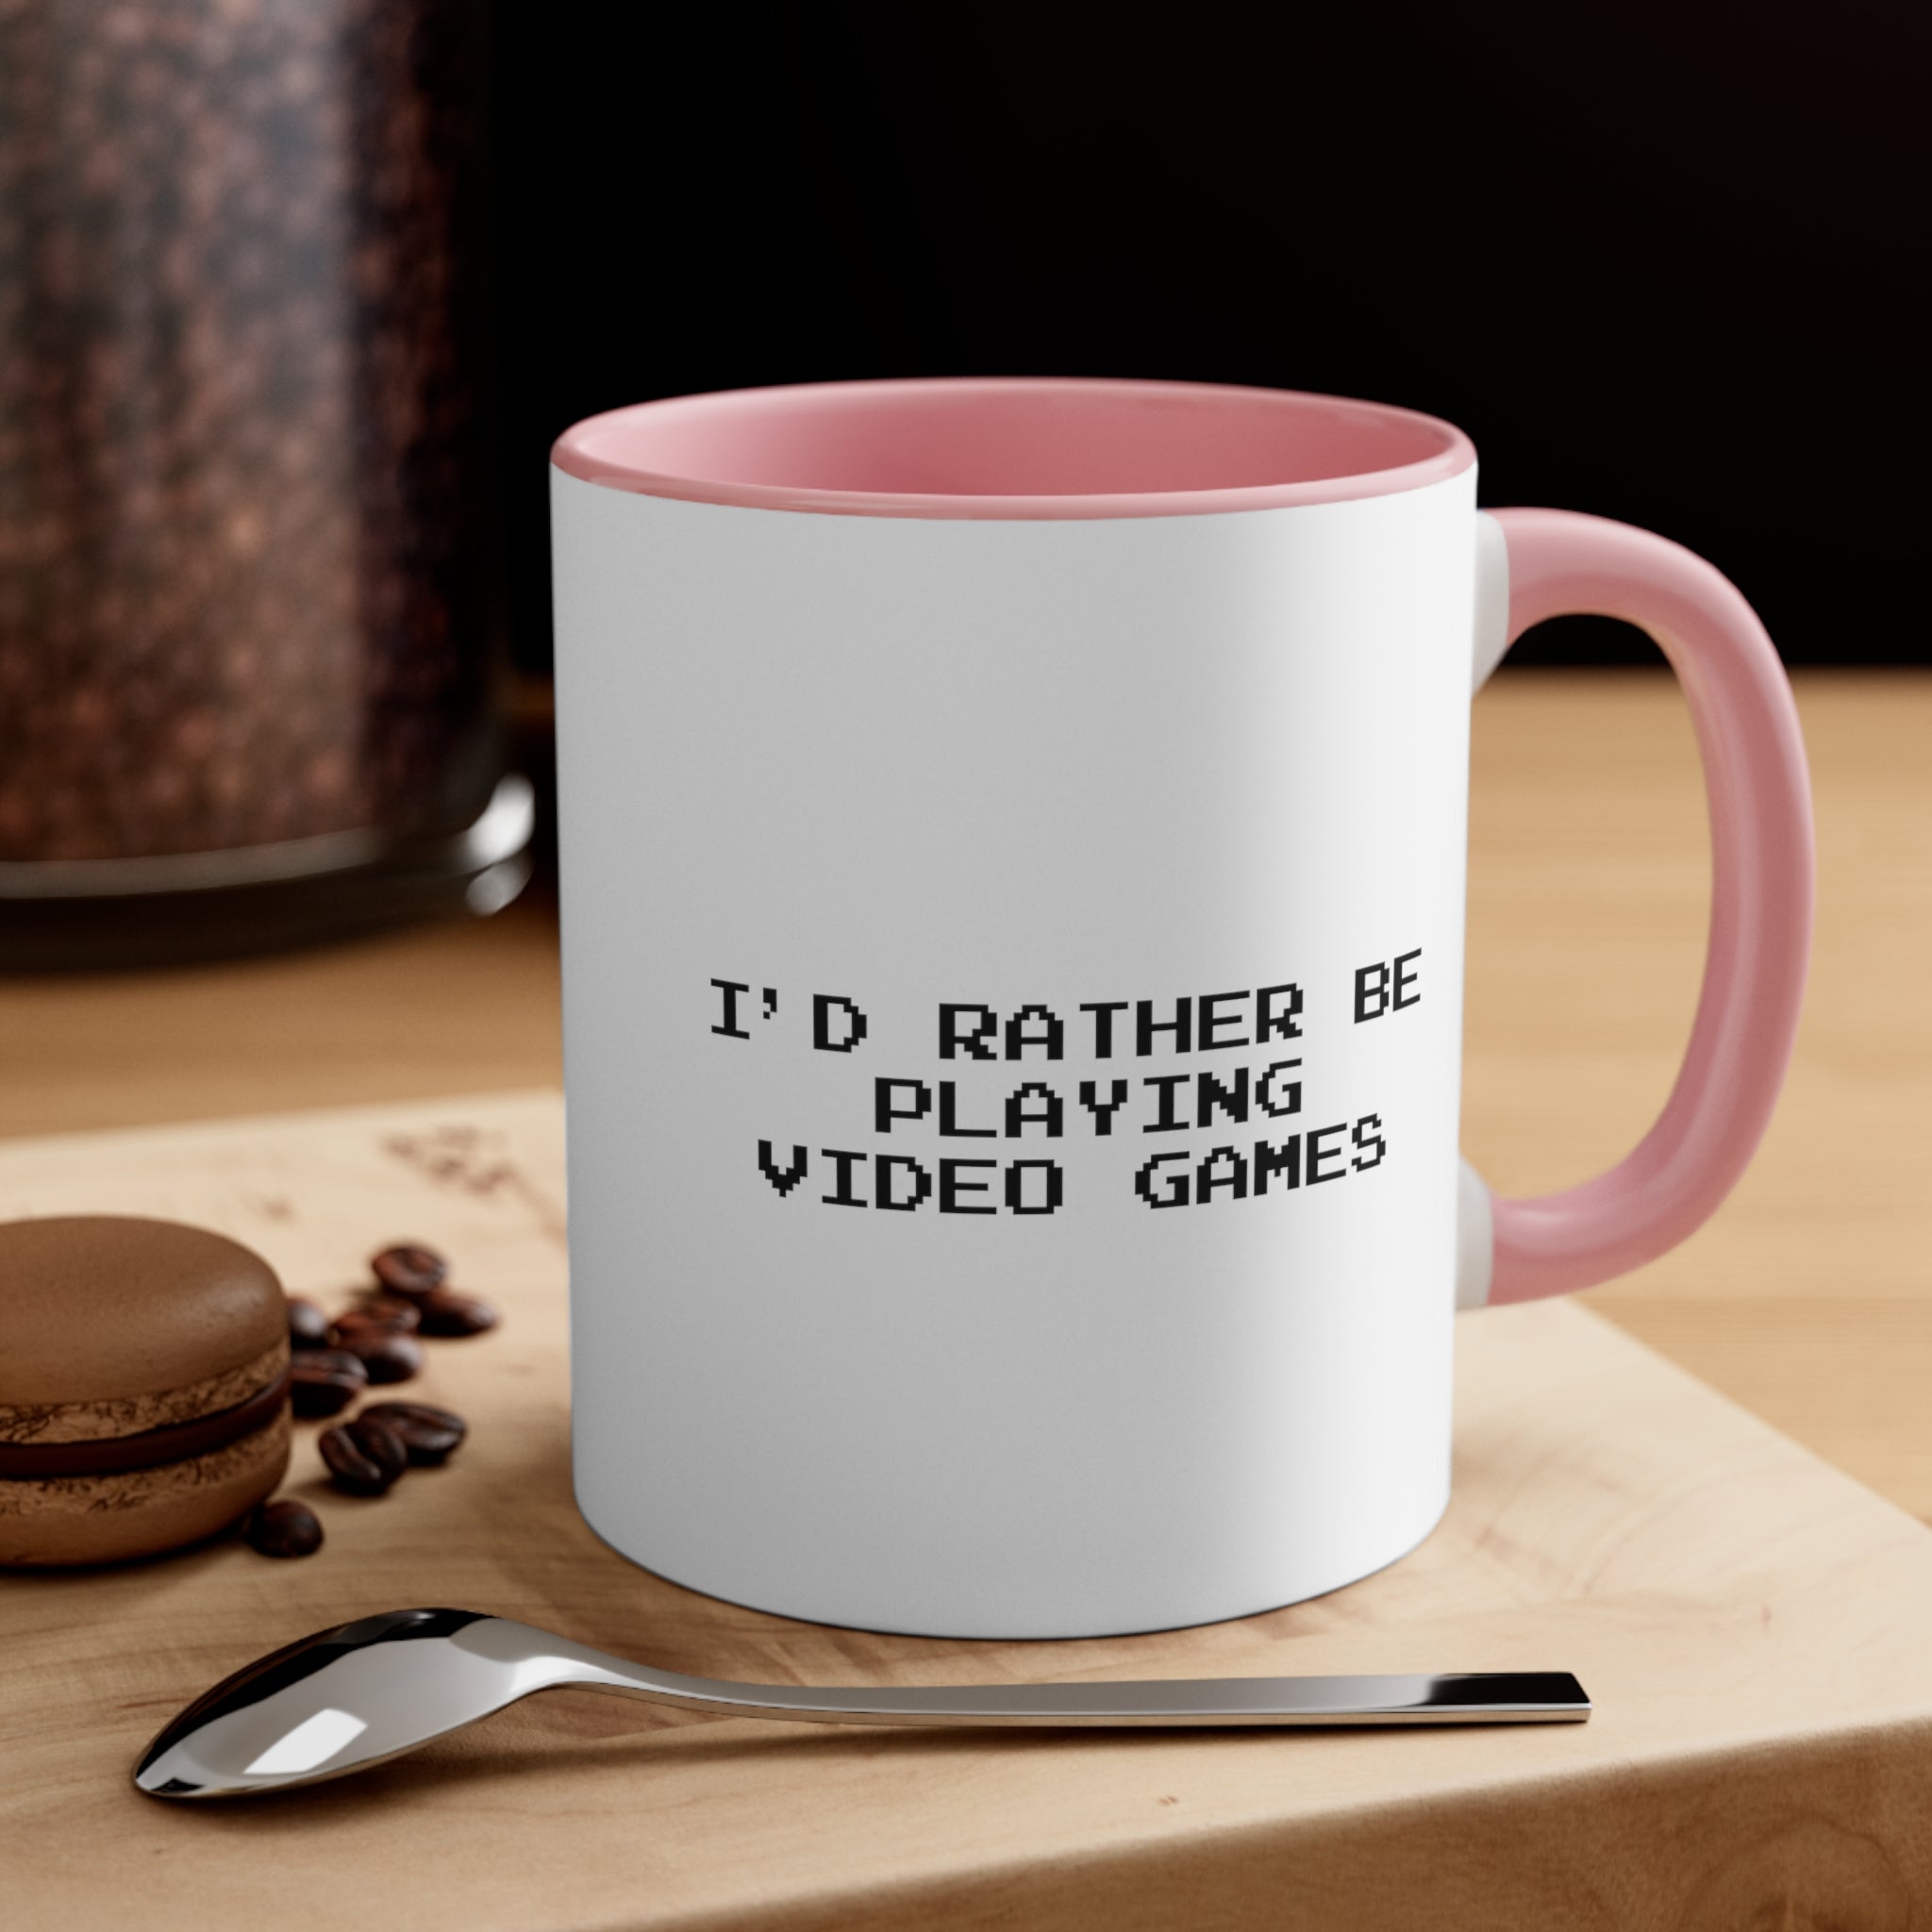 Video Games I'd Rather Be Playing Coffee Mug, 11oz cups mugs cup Gamer Gift For Him Her Game Cup Cups Mugs Birthday Christmas Valentine's Anniversary Gifts